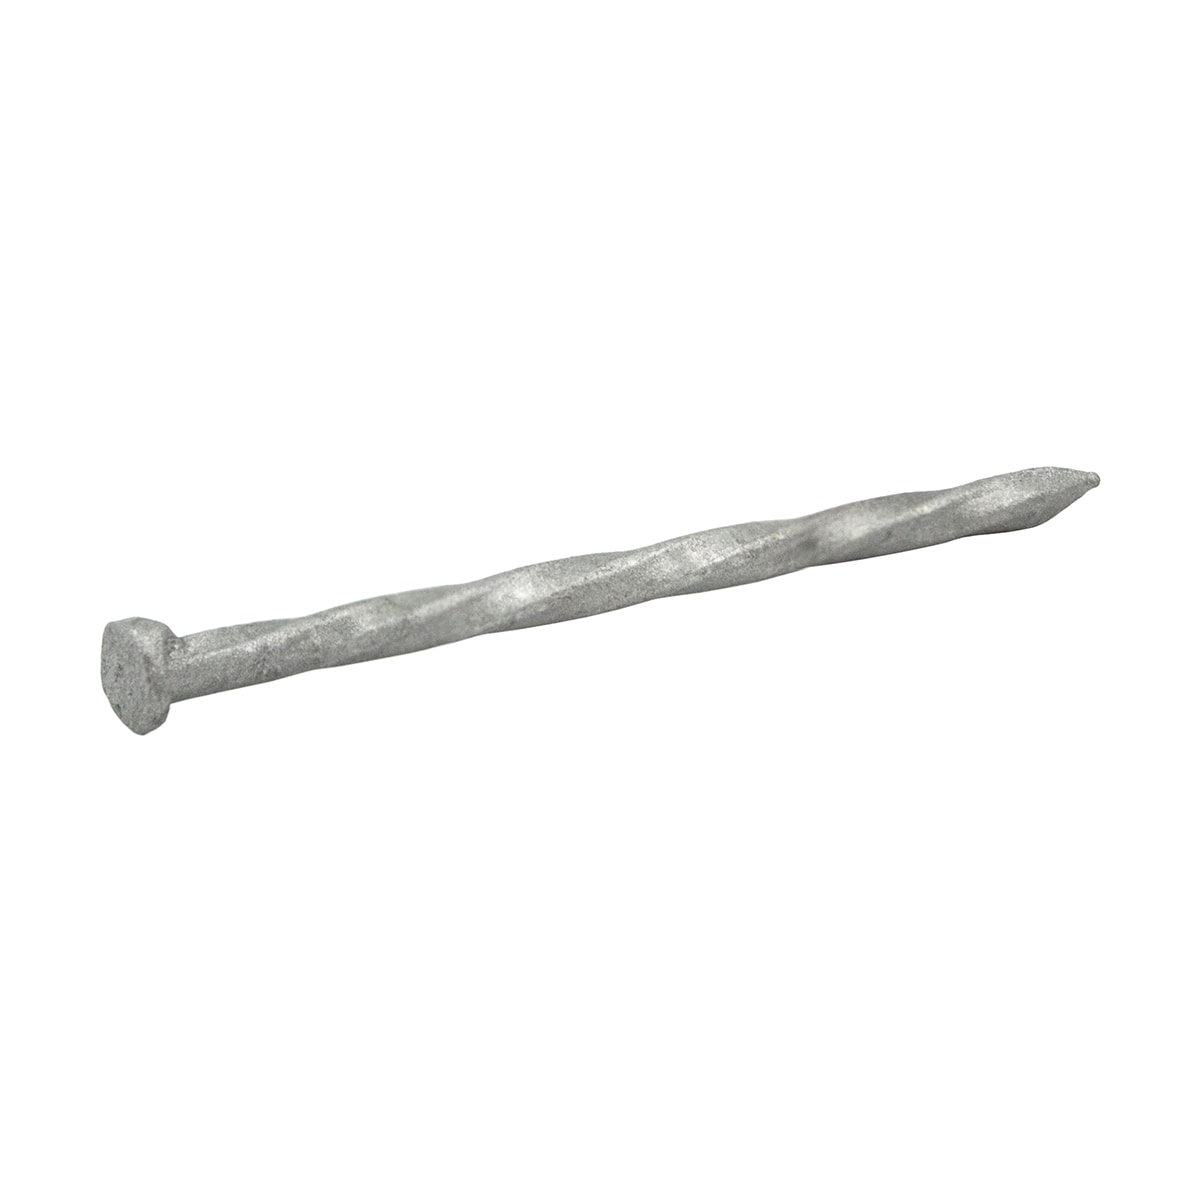 Metabo HPT 1-3/4-in 16-Gauge Siding Nails (3600-Per Box) in the Specialty  Nails department at Lowes.com